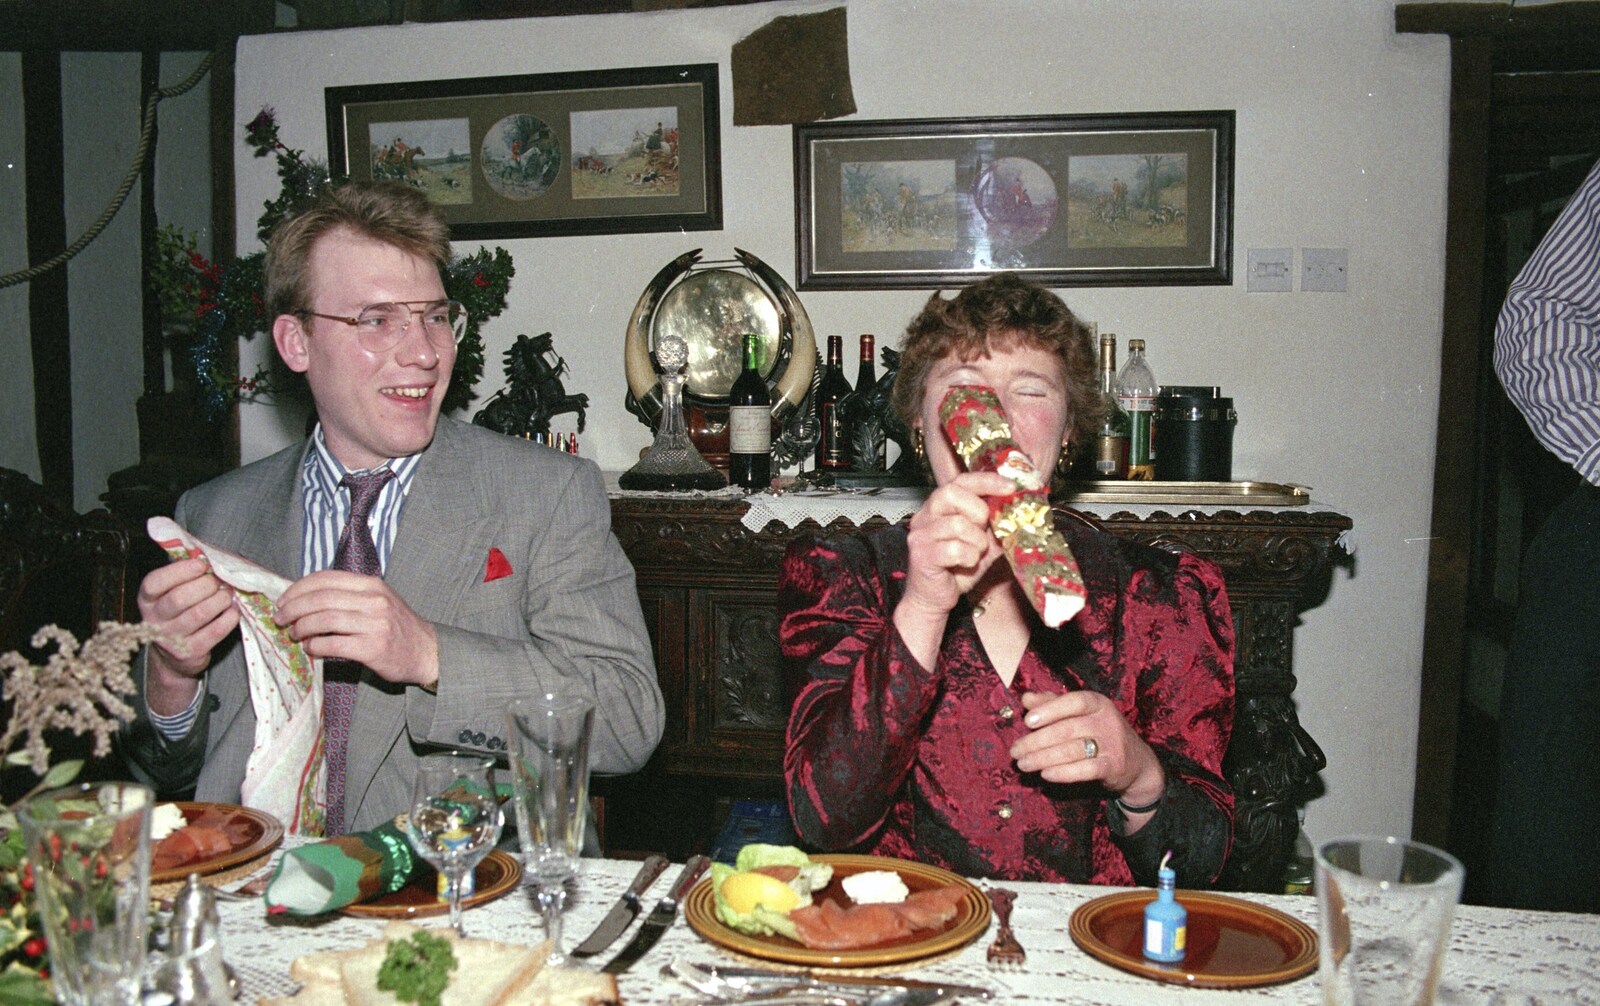 Brenda gets a cracker from Christmas Dinner with Geoff and Brenda, Stuston, Suffolk - 25th December 1990